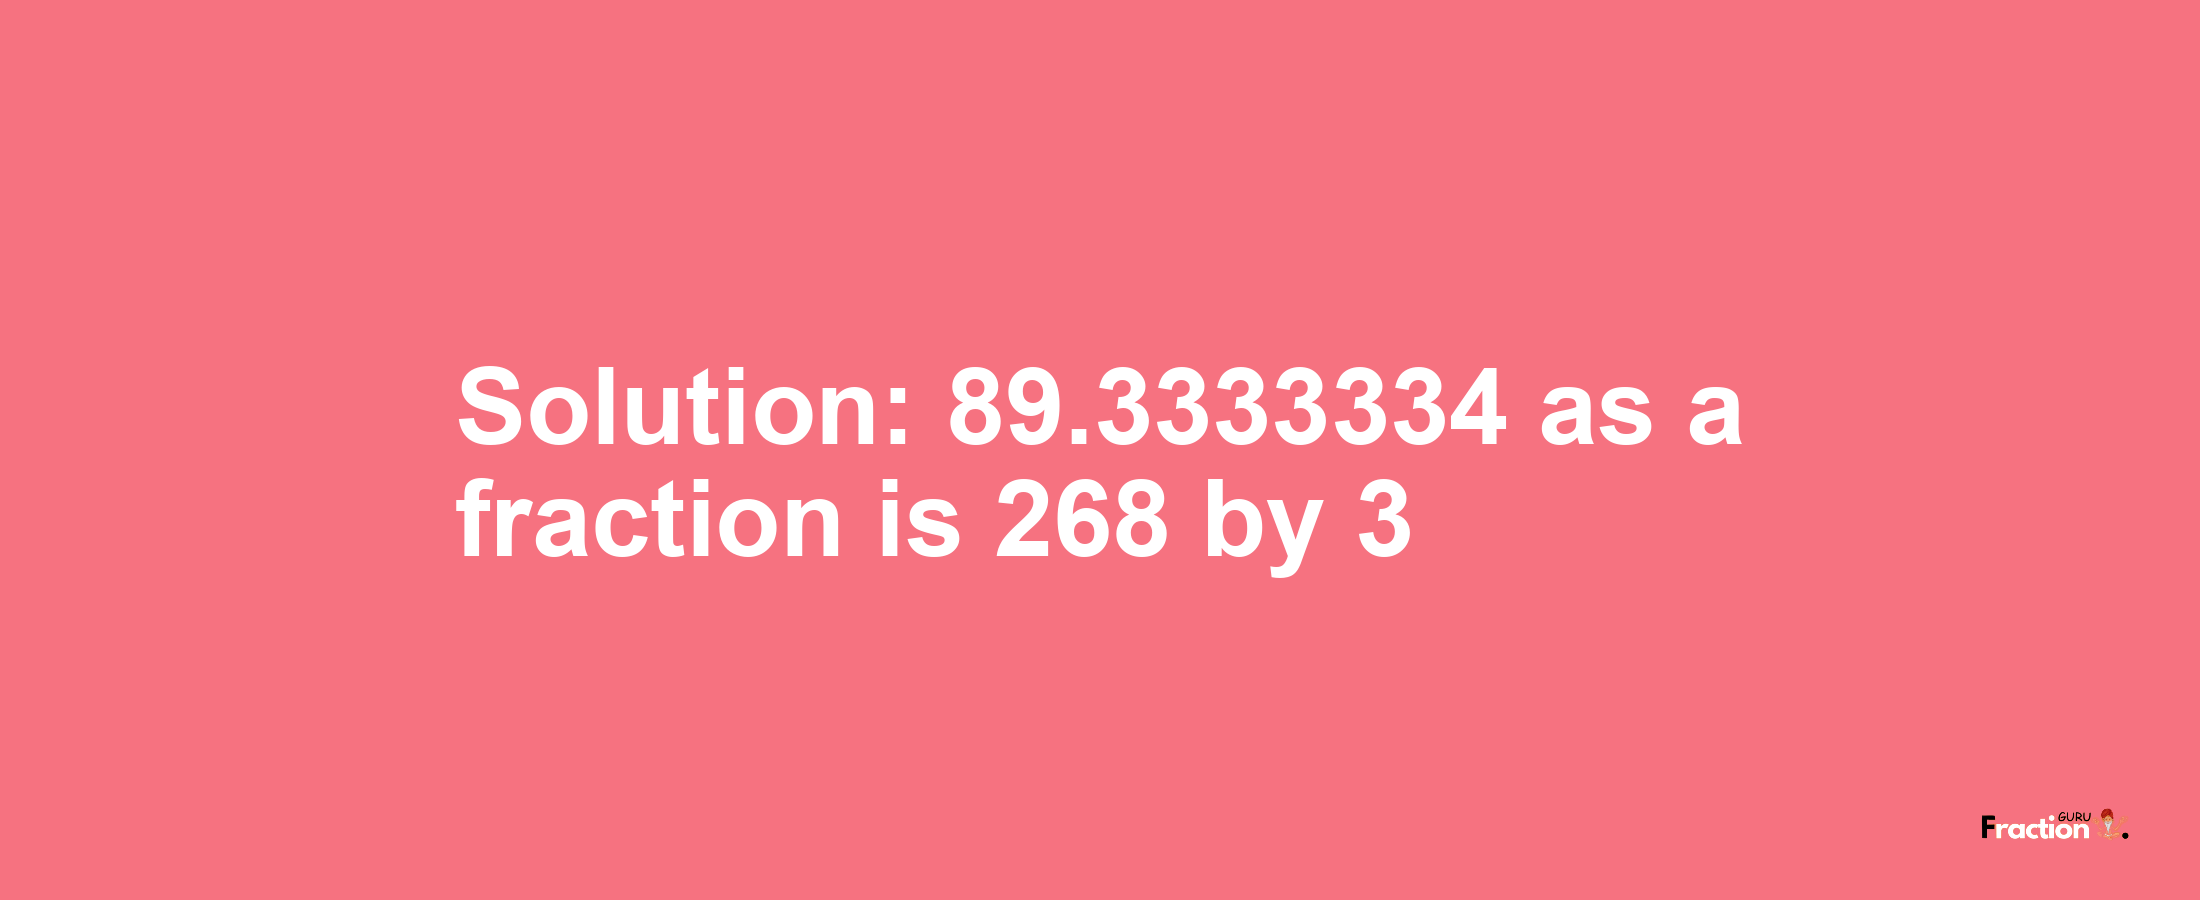 Solution:89.3333334 as a fraction is 268/3